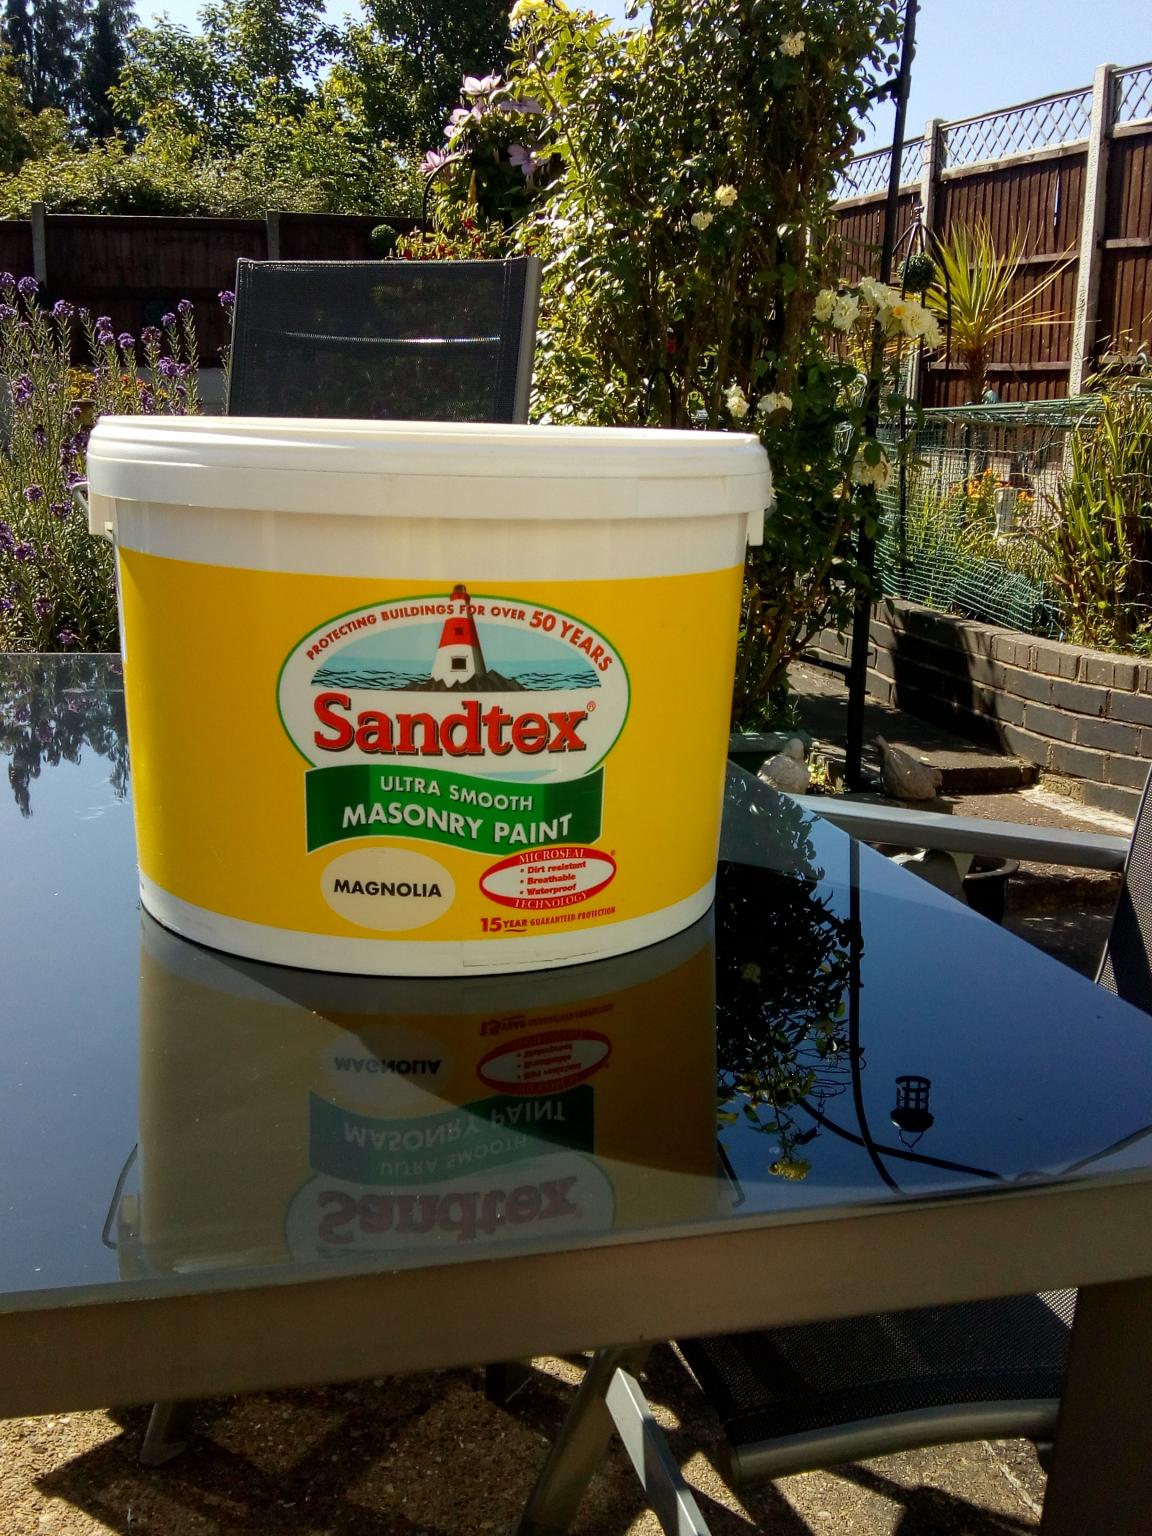 Sandtex Ultra smooth Masonary paint in WR5 Worcester for £17.00 for